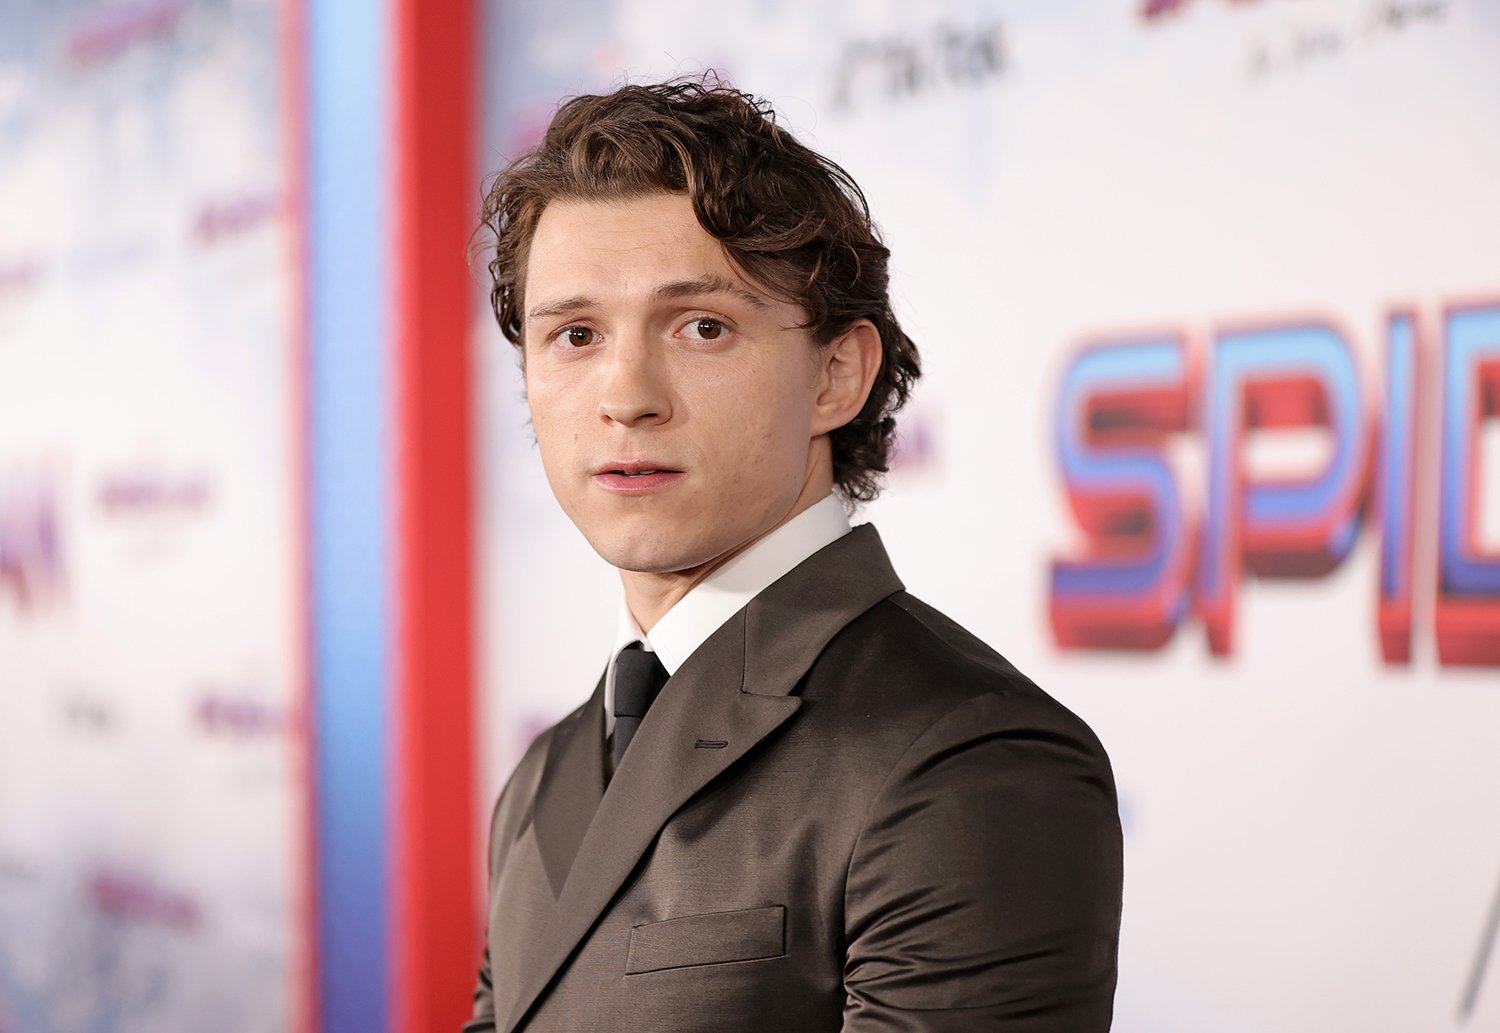 Tom Holland attends the Spider-Man: No Way Home premiere in Los Angeles.